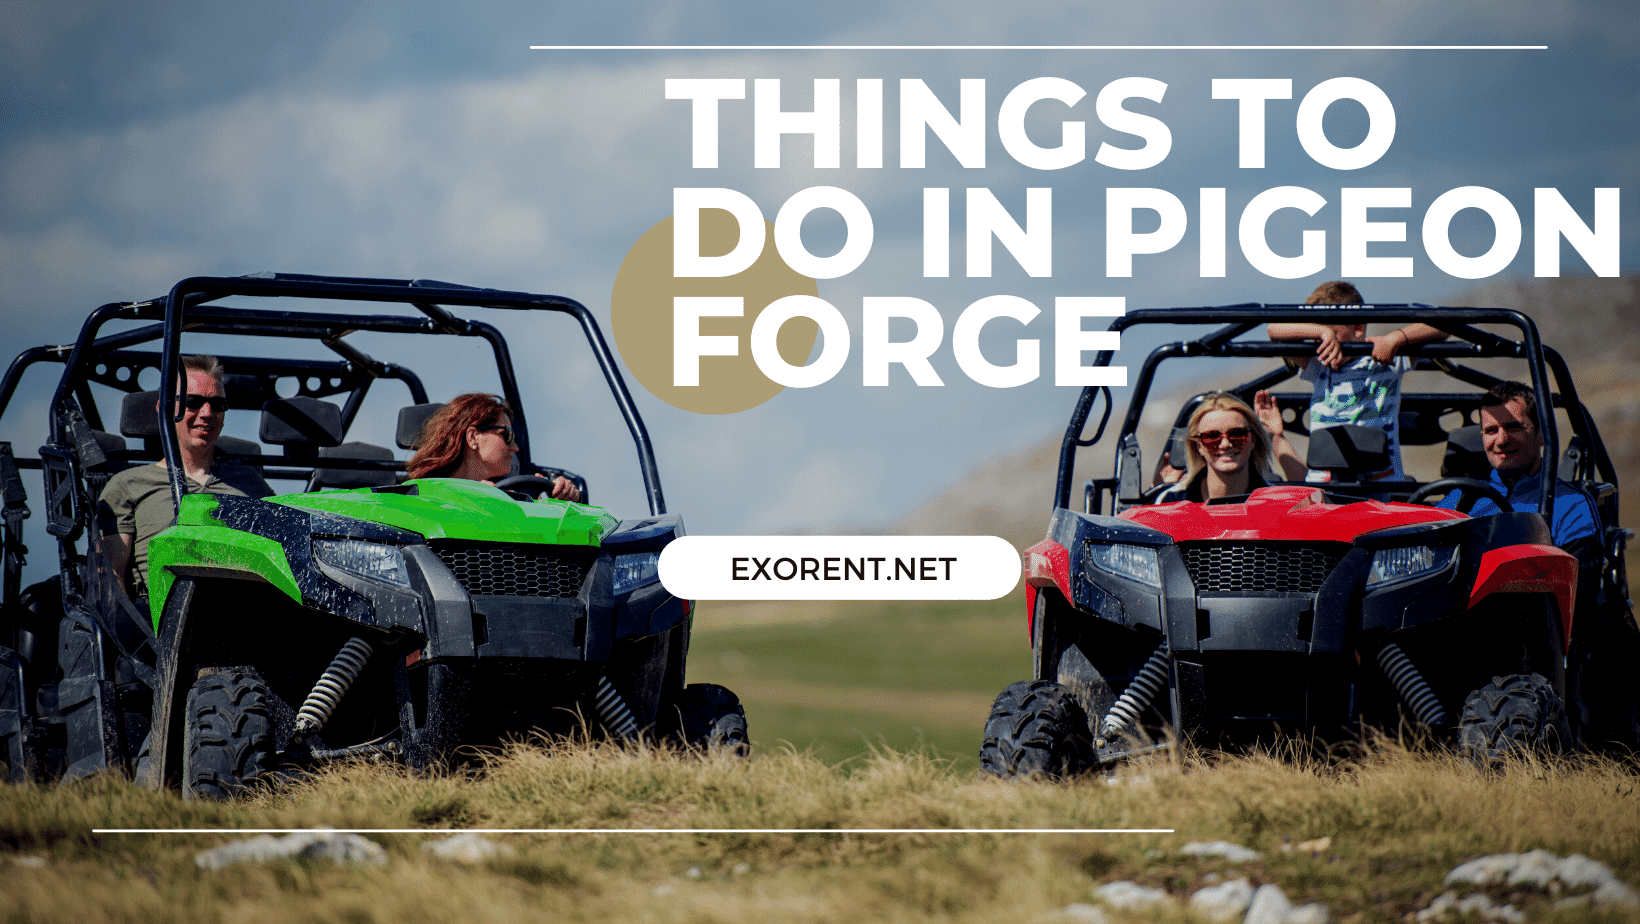 THINGS TO DO IN PIGEON FORGE